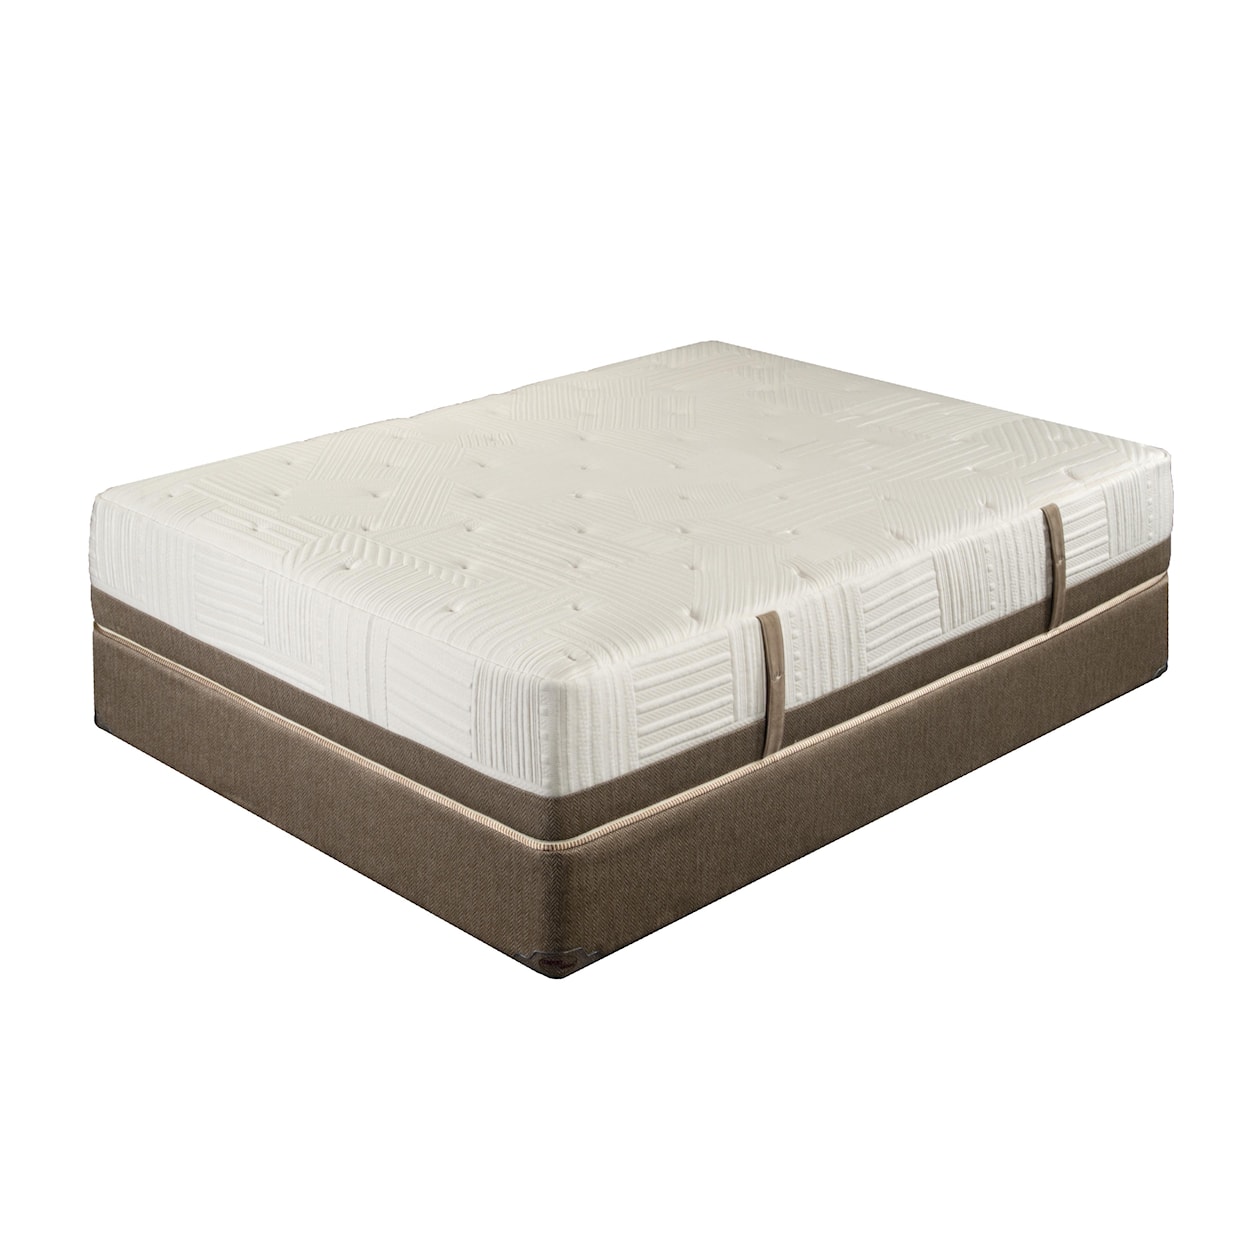 King Koil Extended Life 3100 King Luxury Firm Mattress Set